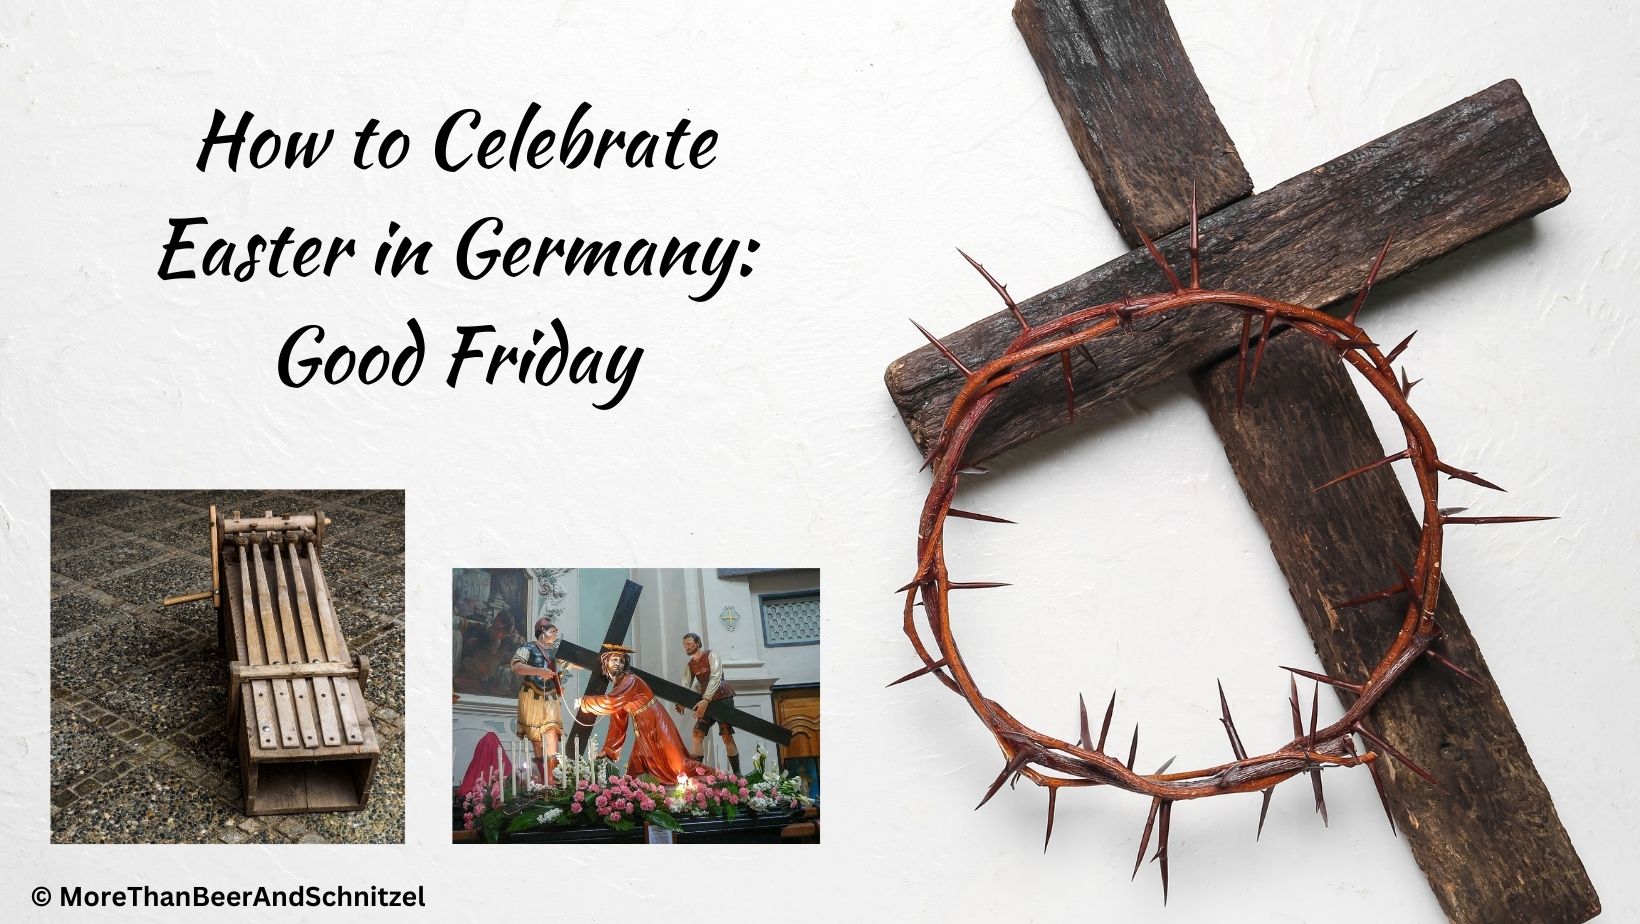 Text: How to celebrate easter in germany good friday (Karfreitag). Image of a cross and the thorn crown. One photo of a ratchet (Ratsche) and one of jesus carrying the cross.